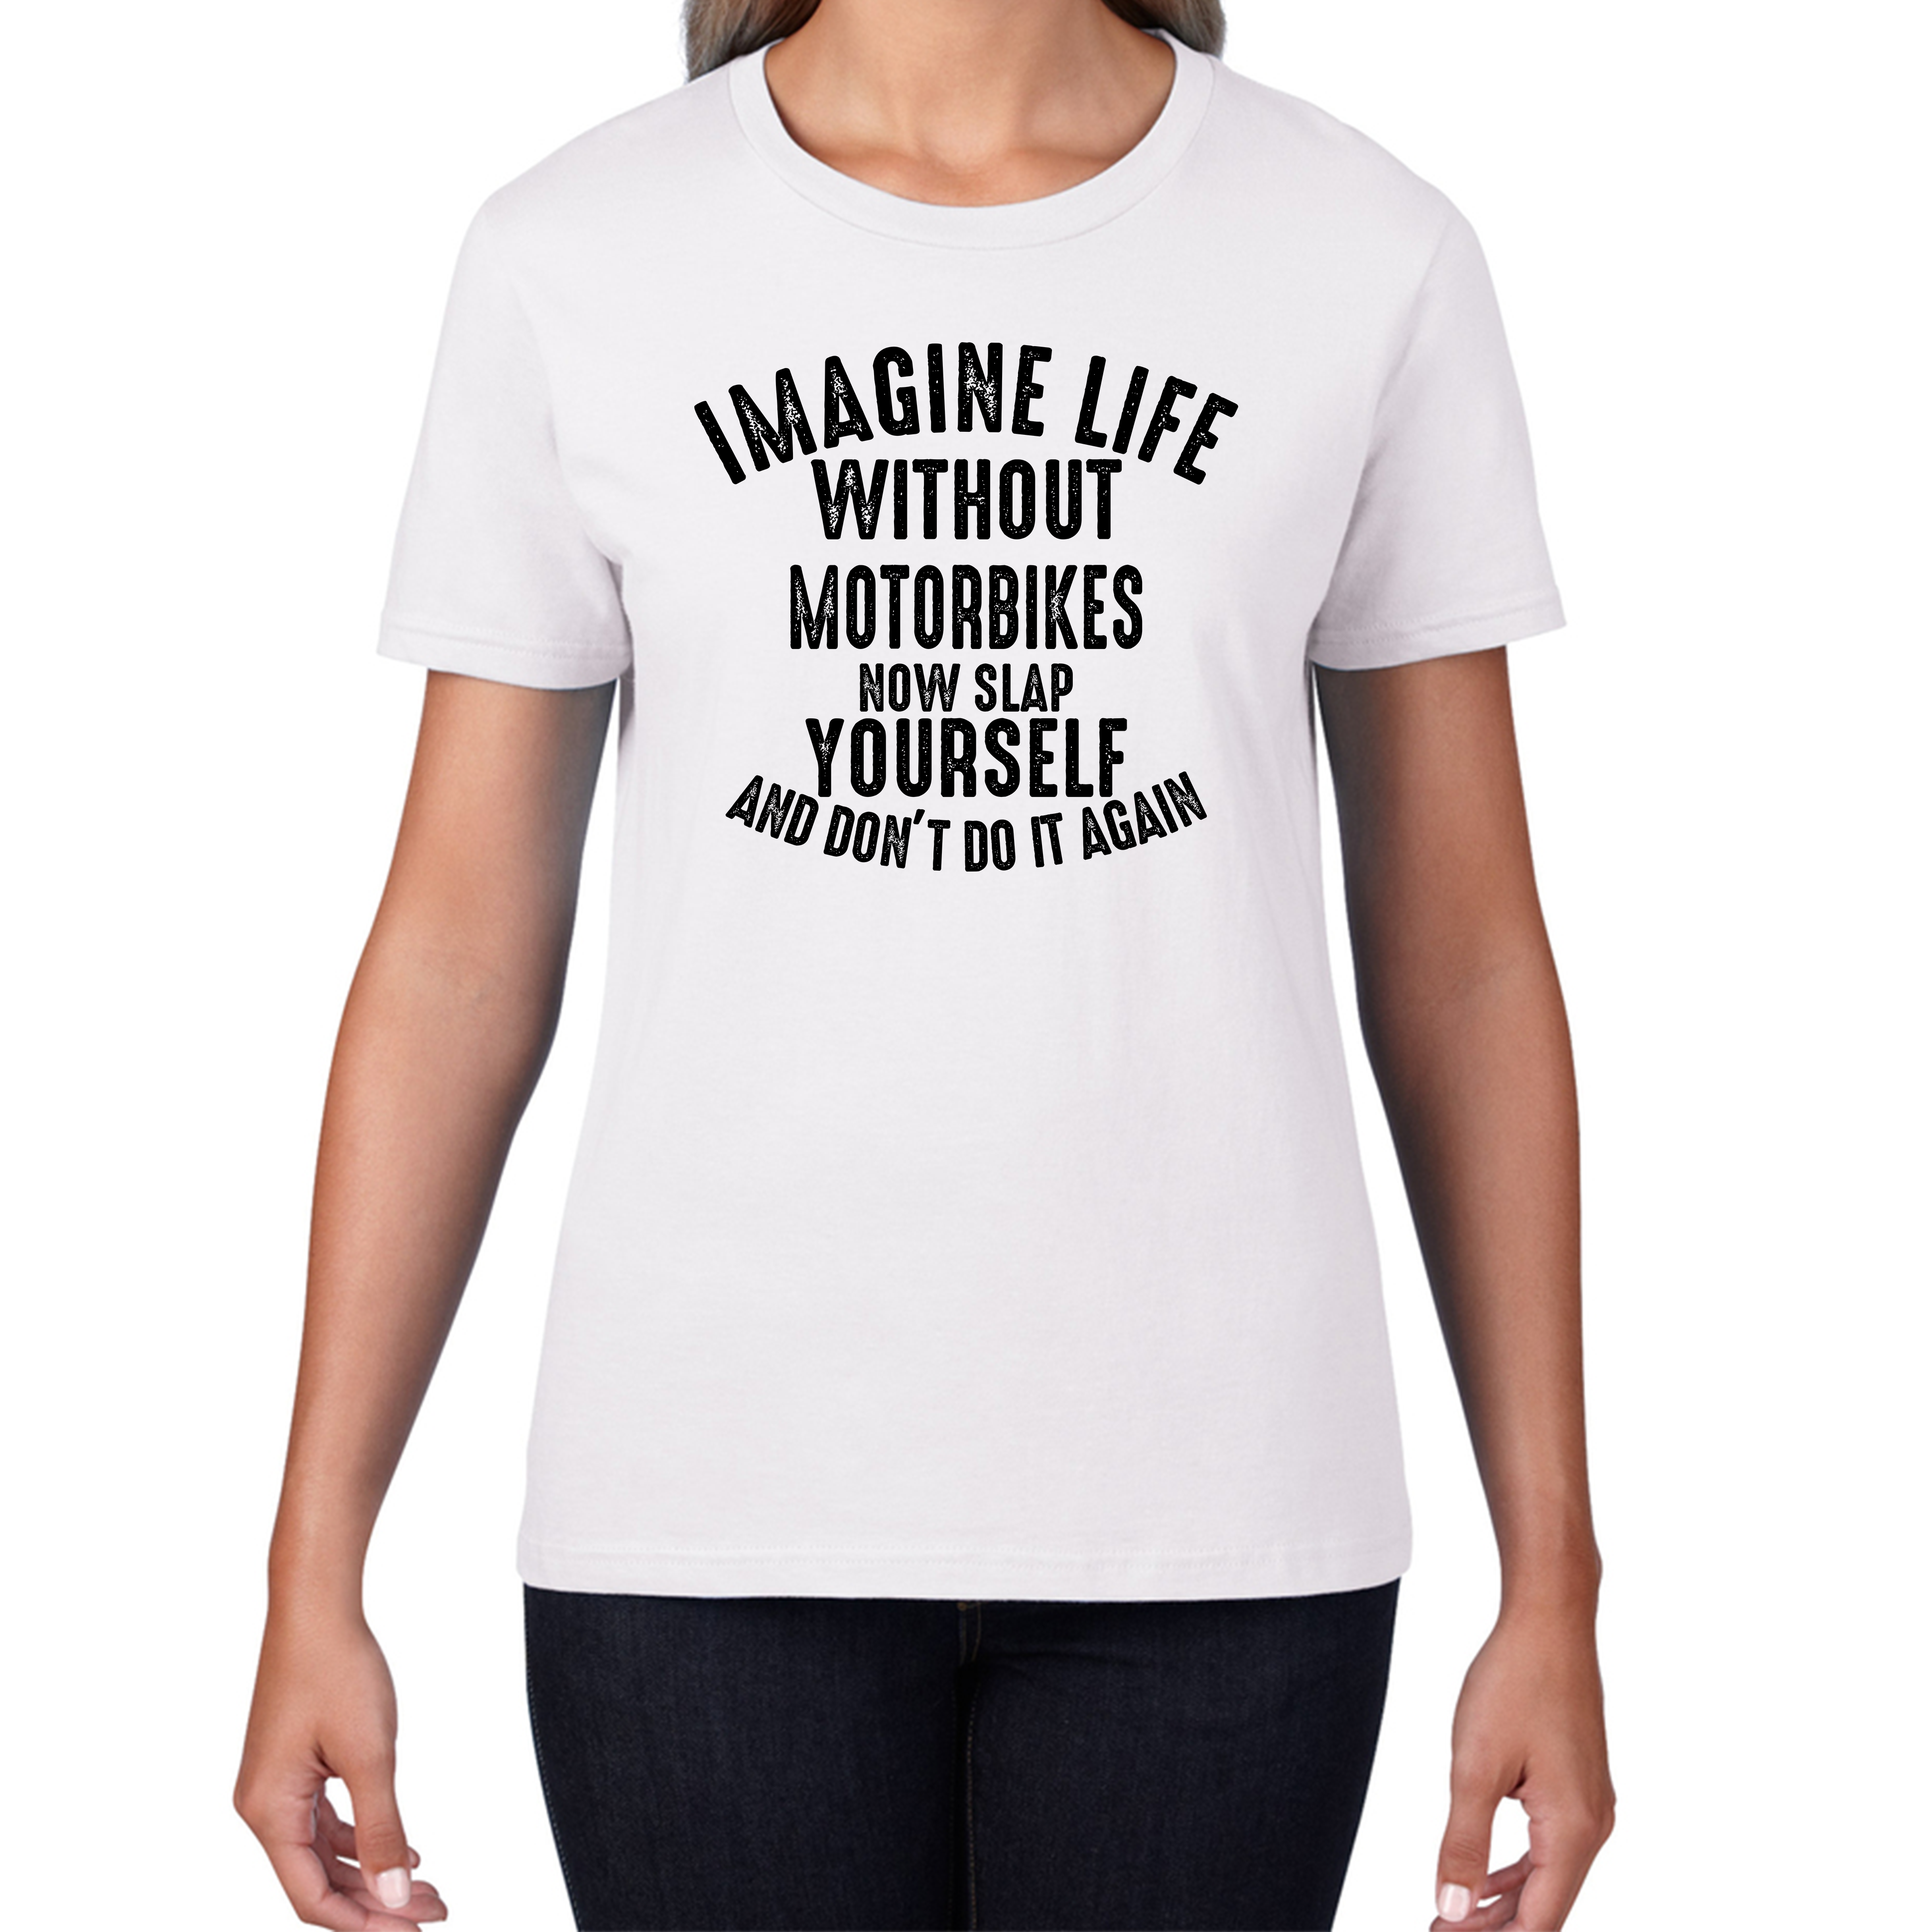 Imagine Life Without Motorbikes Now Slap Yourself And Don' Do It Again T-Shirt Bike Lovers Racers Riders Funny Joke Womens Tee Top